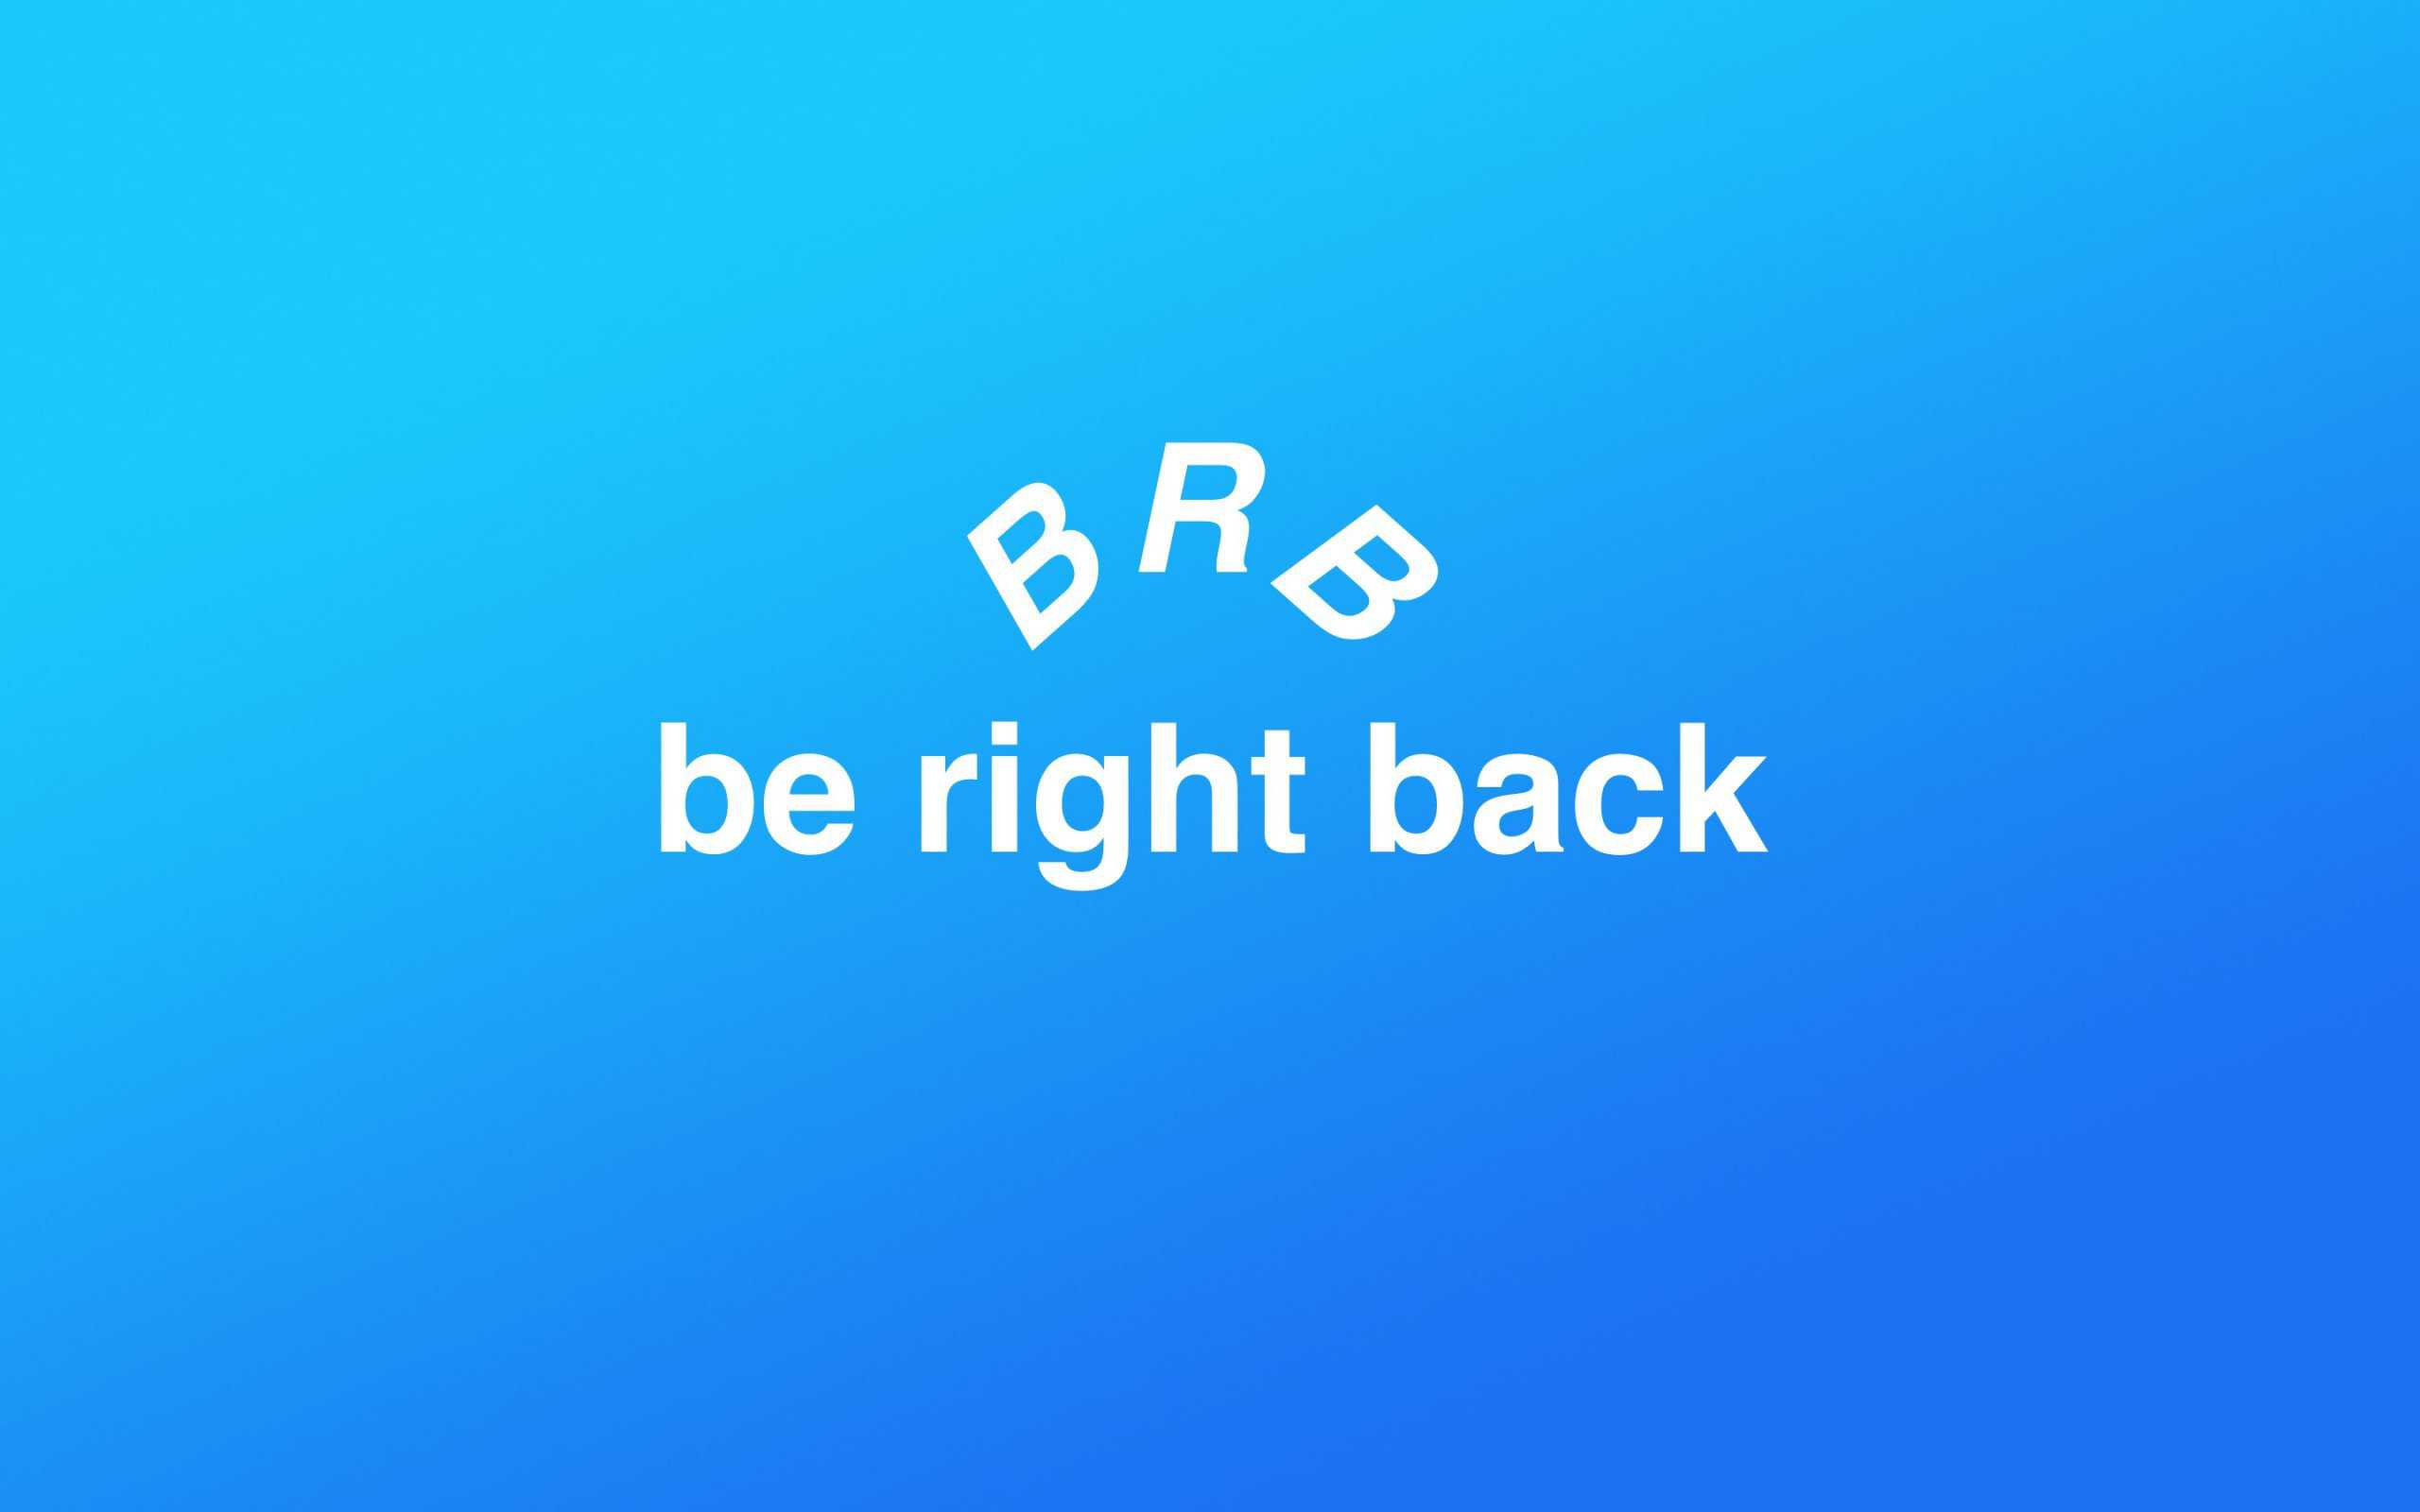 What does BRB stand for?